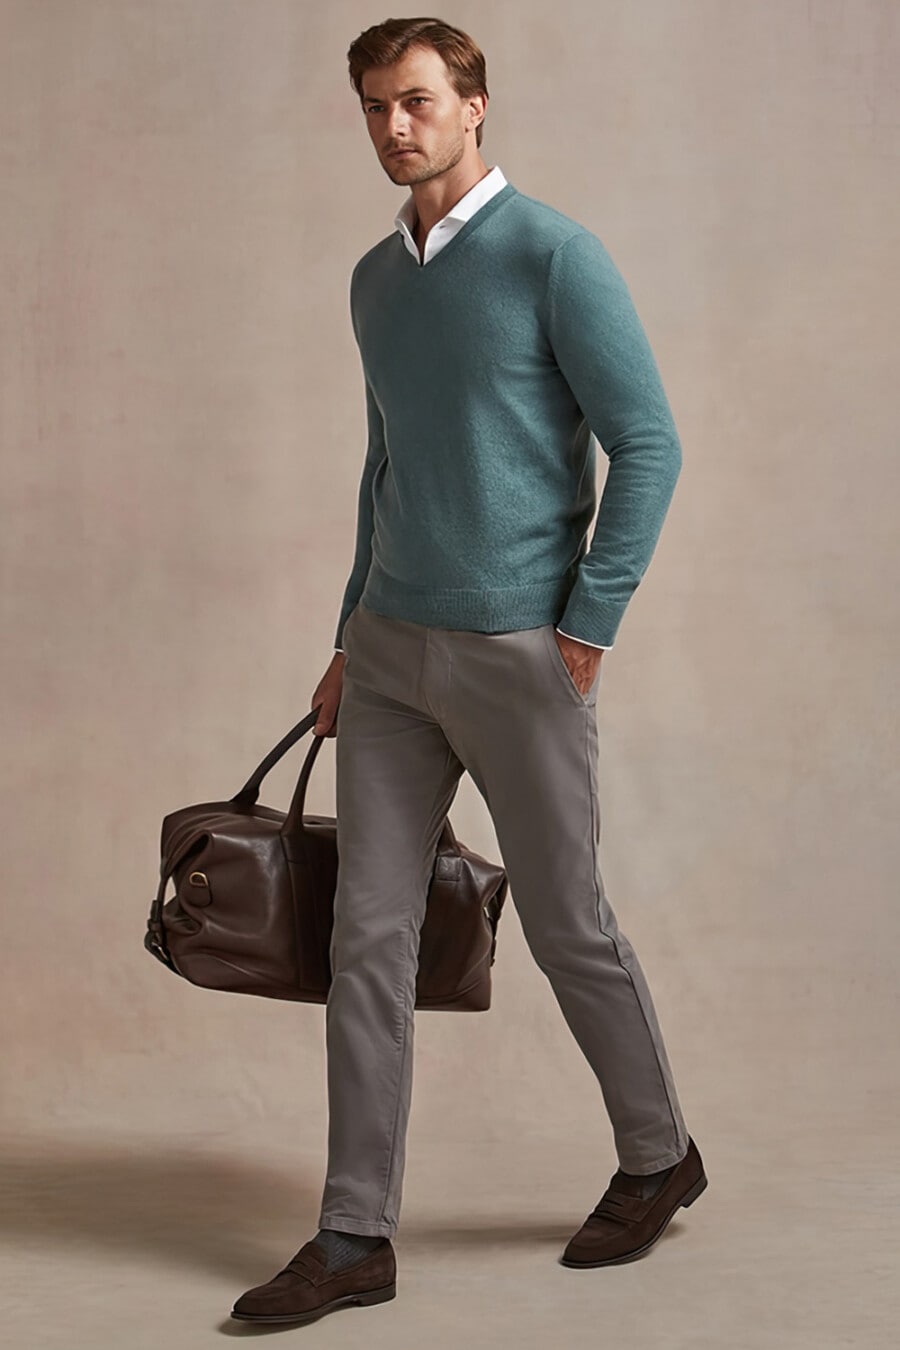 Men's grey pants, white shirt, teal V-neck sweater, brown suede penny loafers and leather brown weekender bag